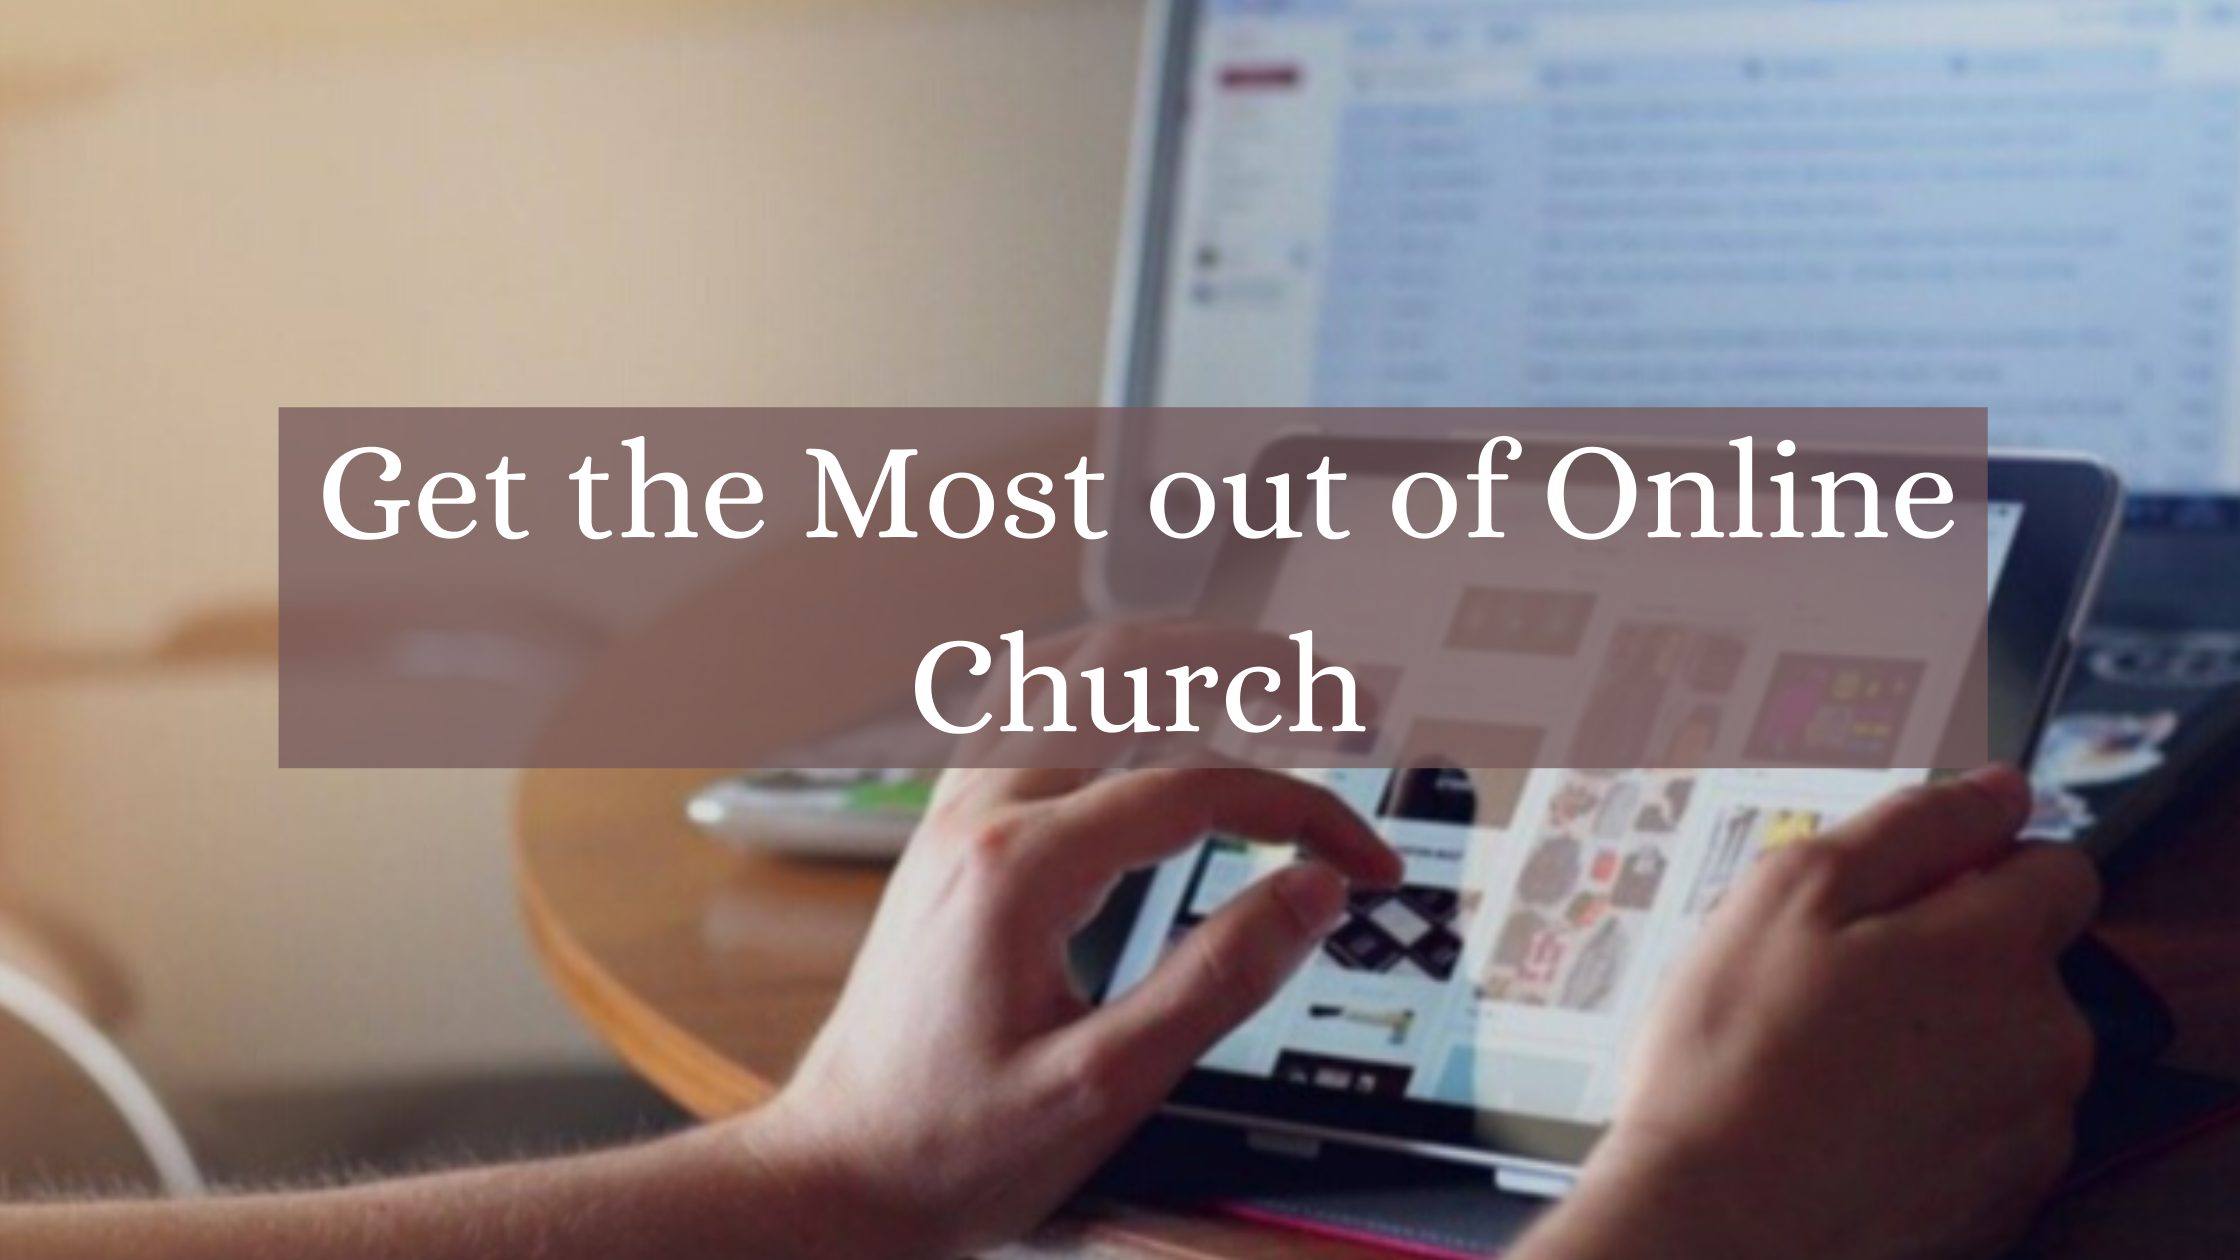 Get the Most out of Online Church